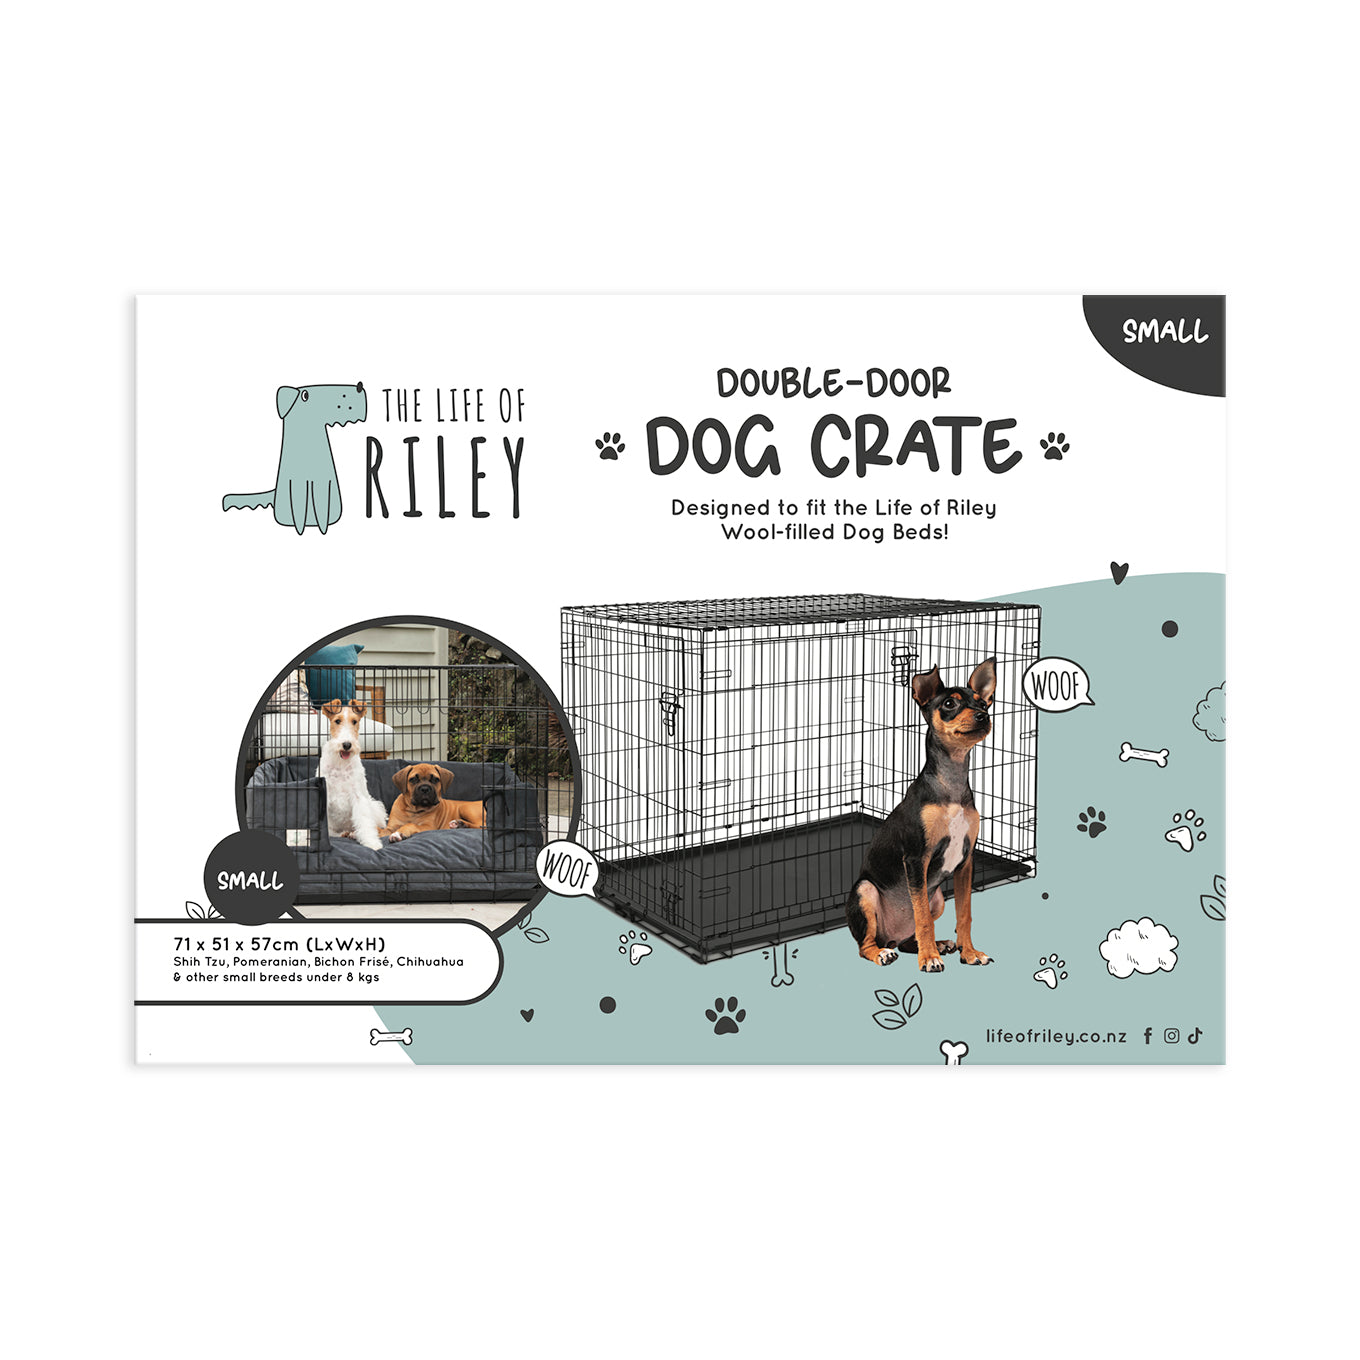 Premium Dog Crate The Life of Riley  The Life of Riley